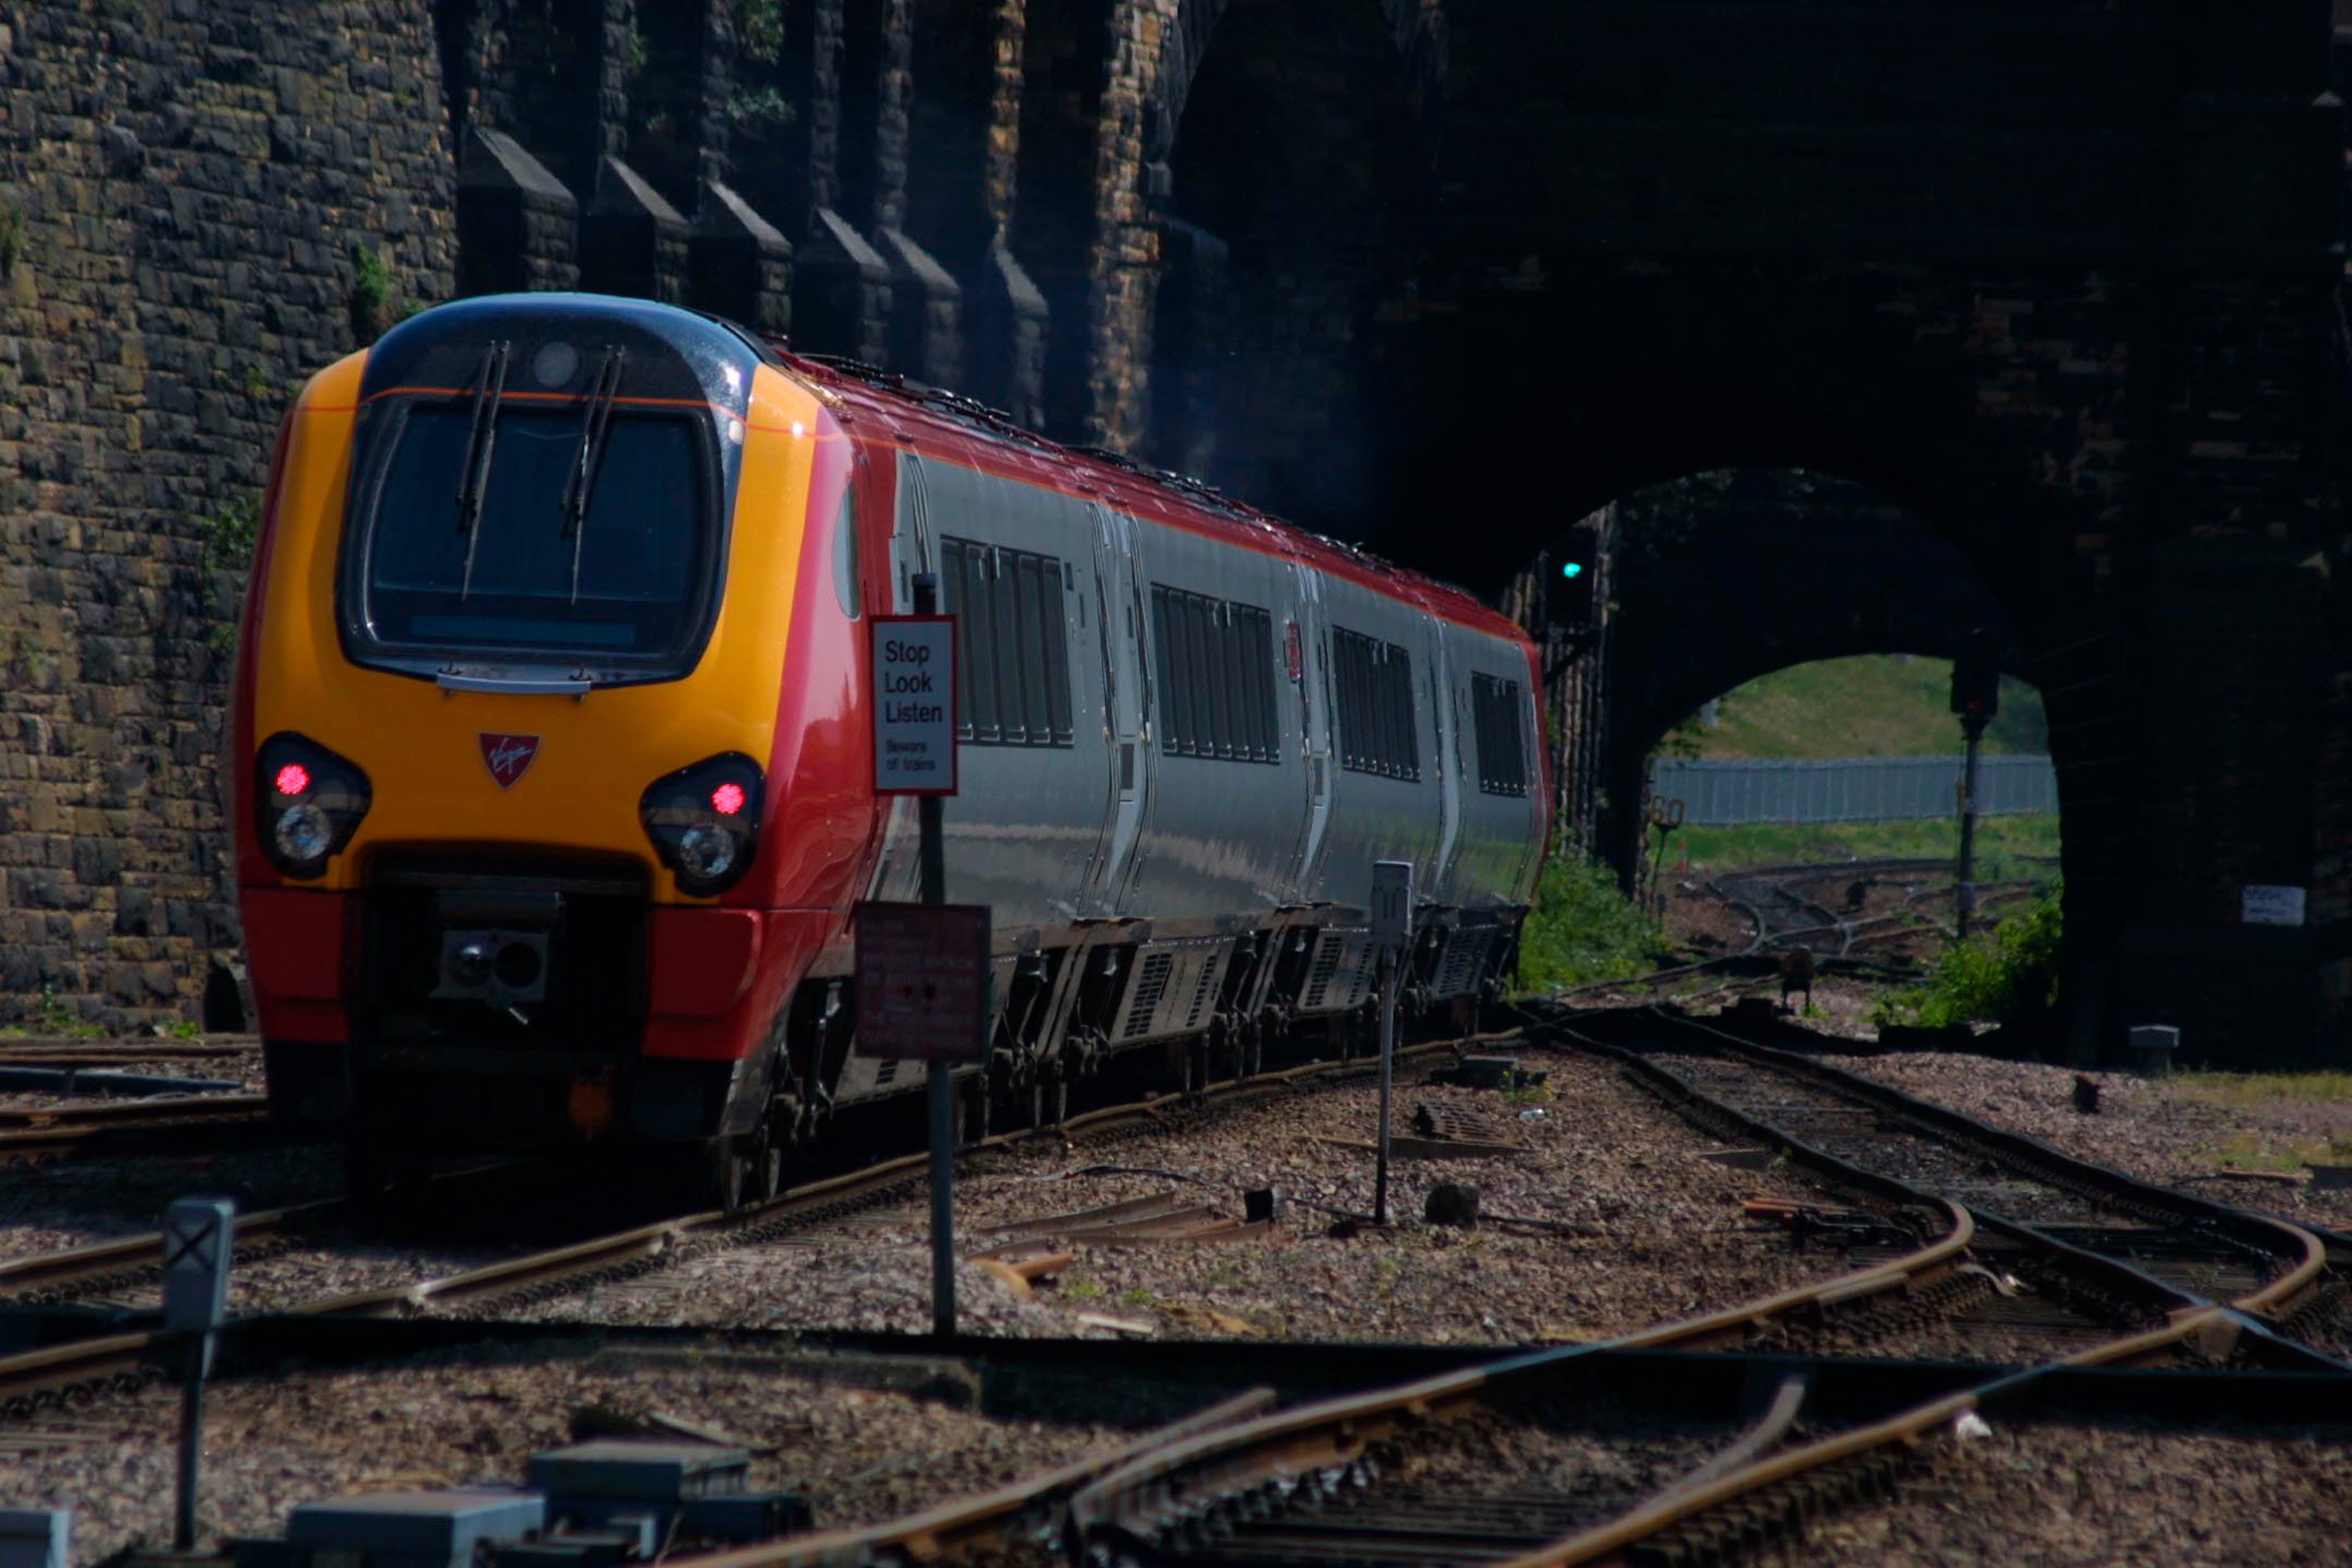 A Virgin Voyager shortly after departing from Sheffield station